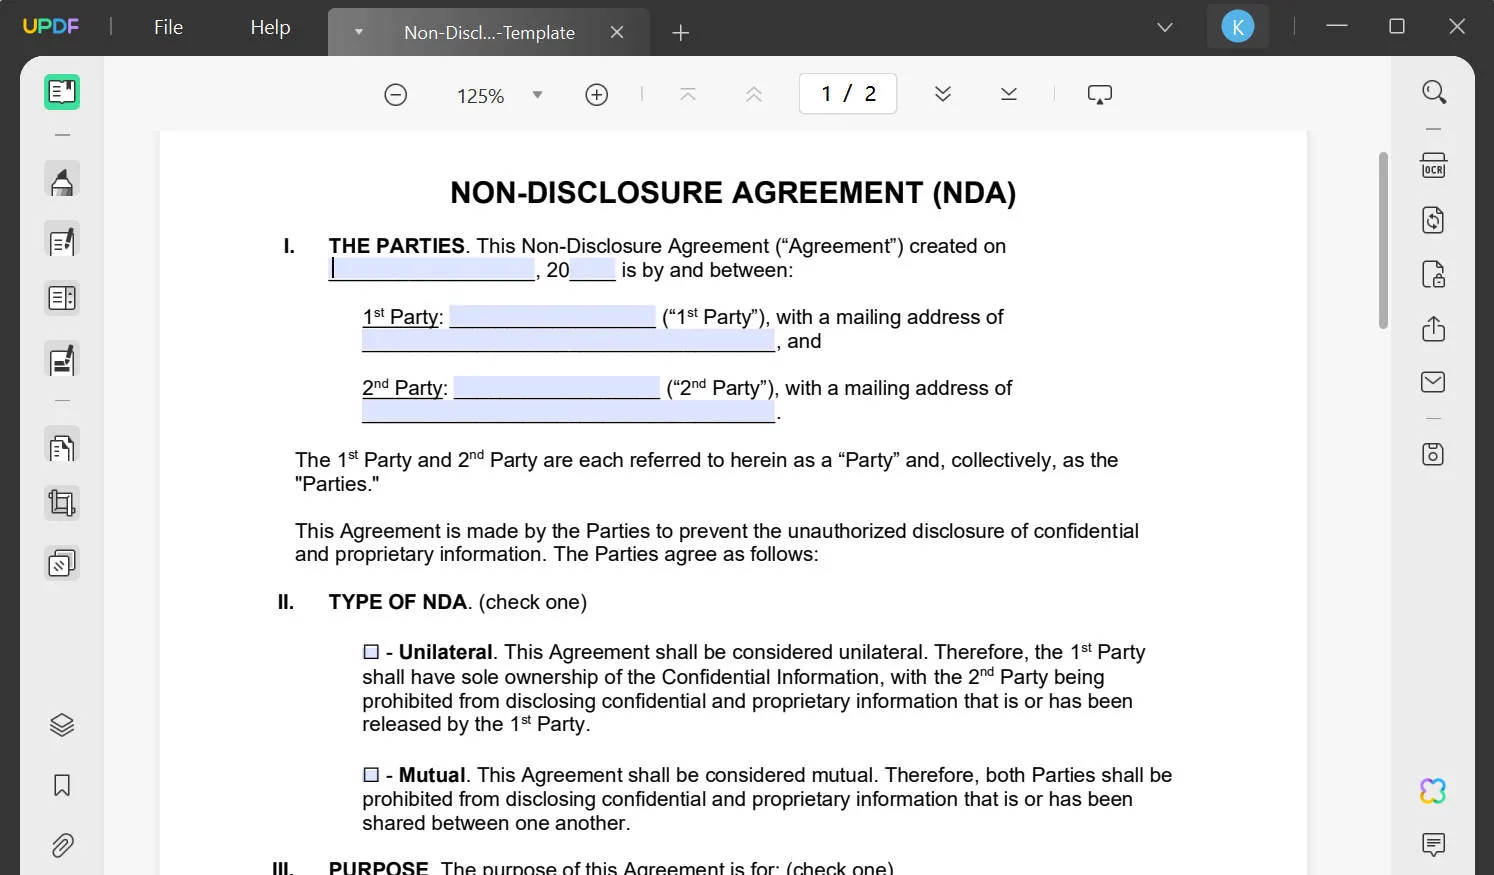 sign non disclosure agreement fill in file